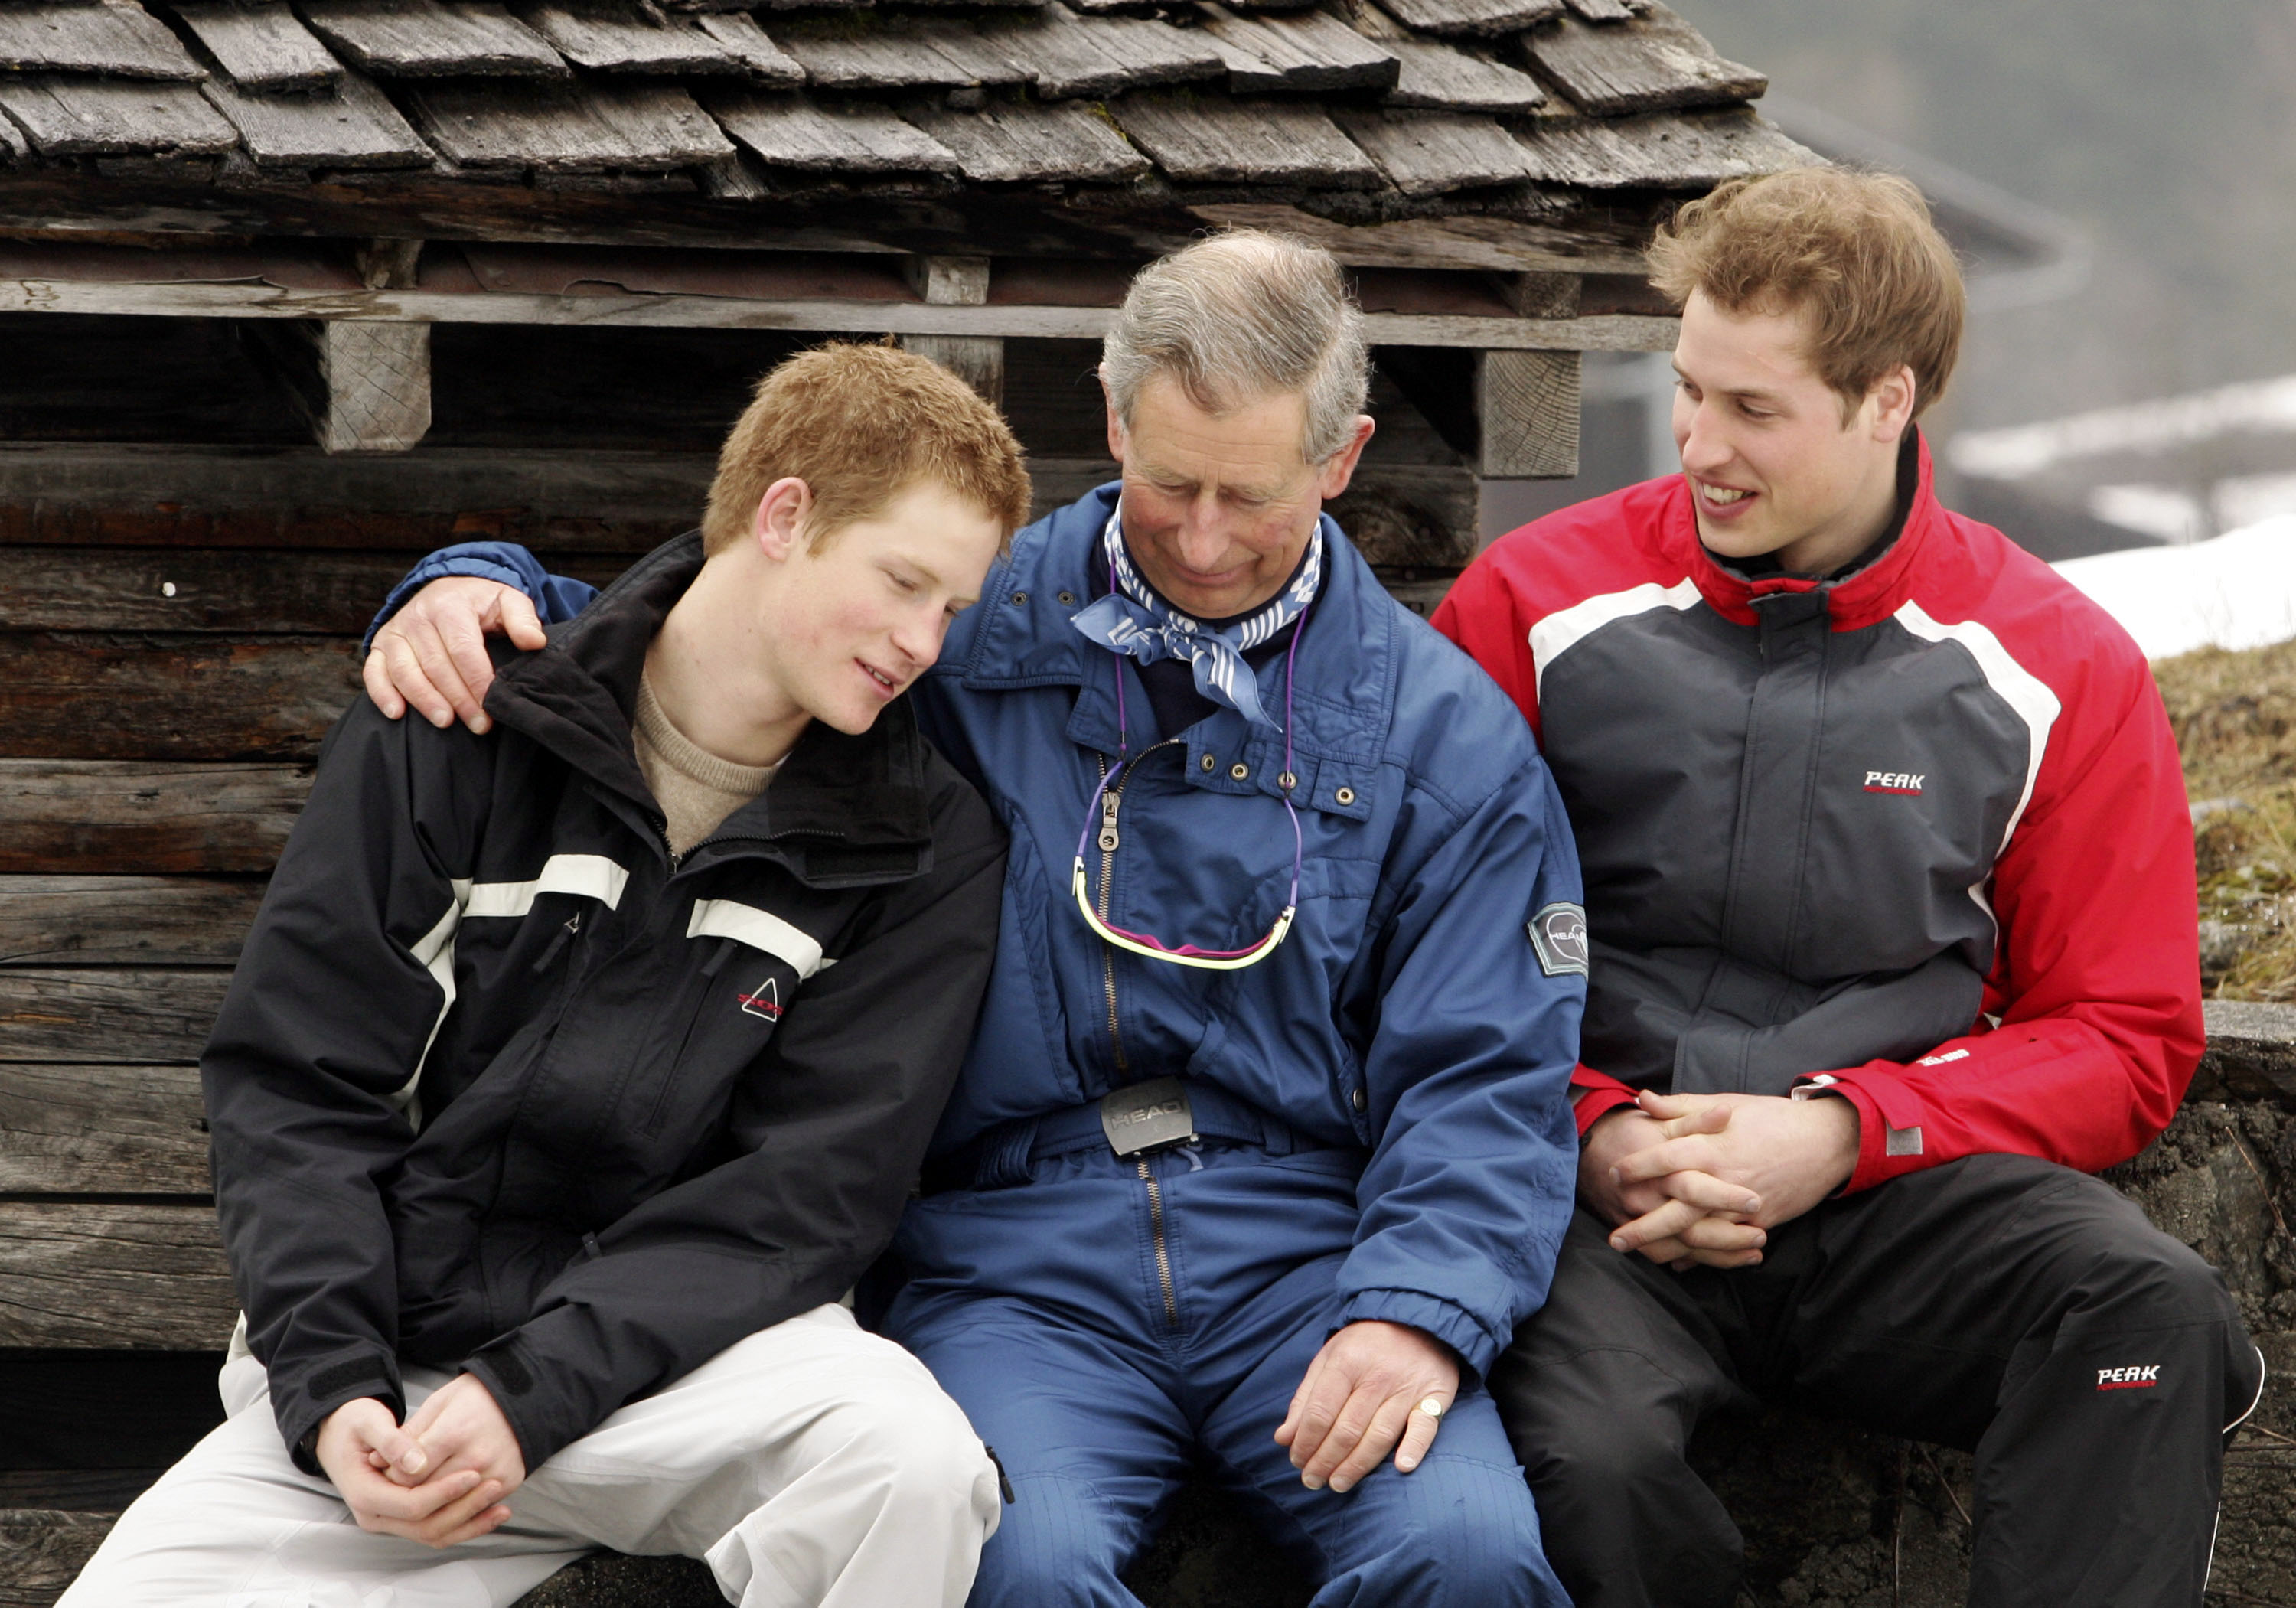 Prince Charles poses with his sons Prince Harry and Prince William during the Royal Family's ski break on March 31, 2005 in Switzerland | Source: Getty Images